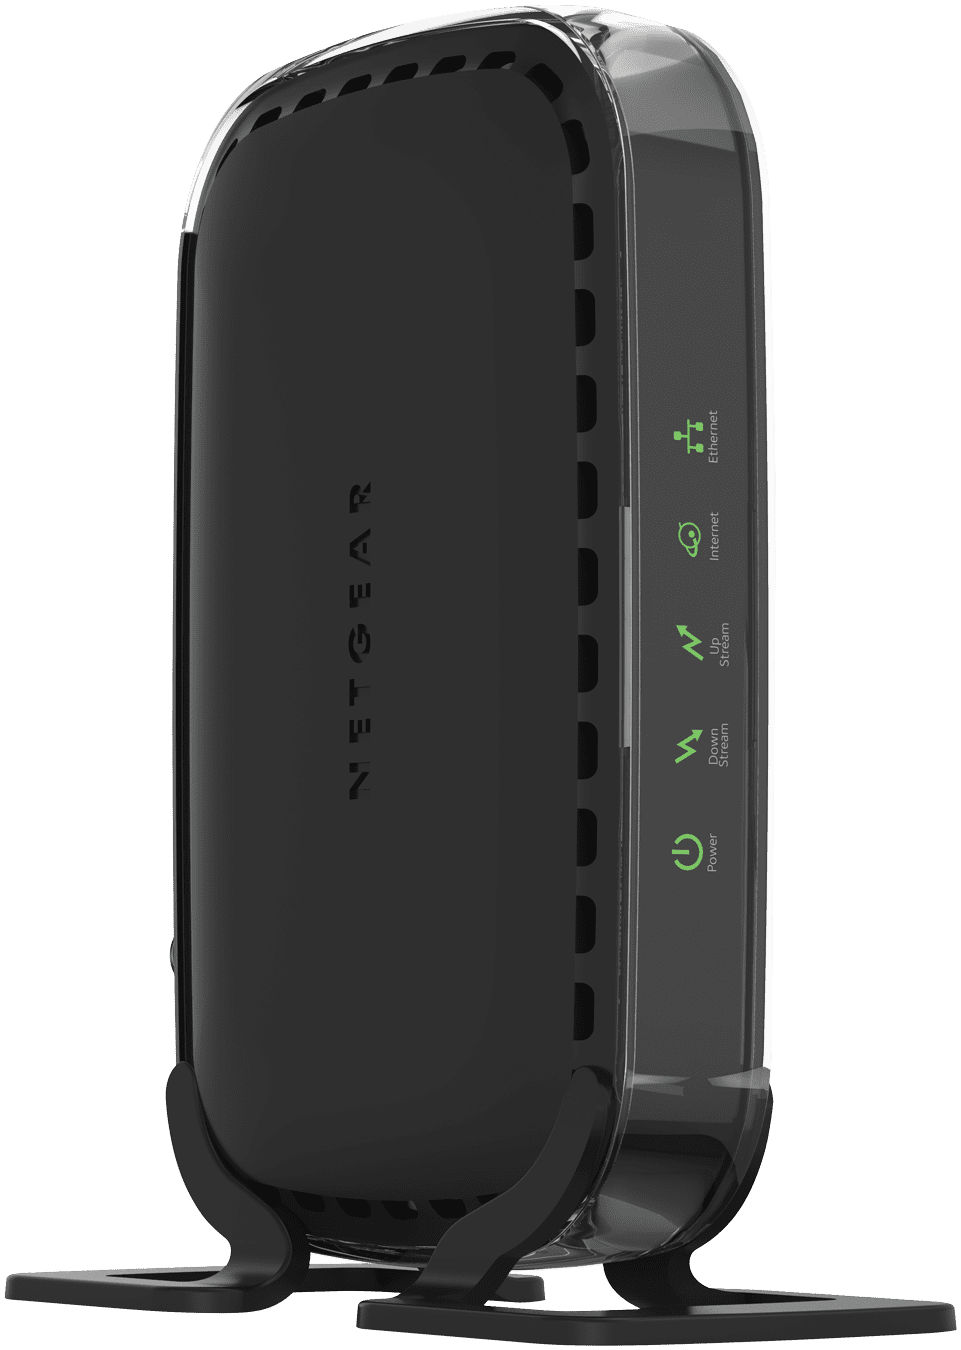 peakhour monitor cable modem